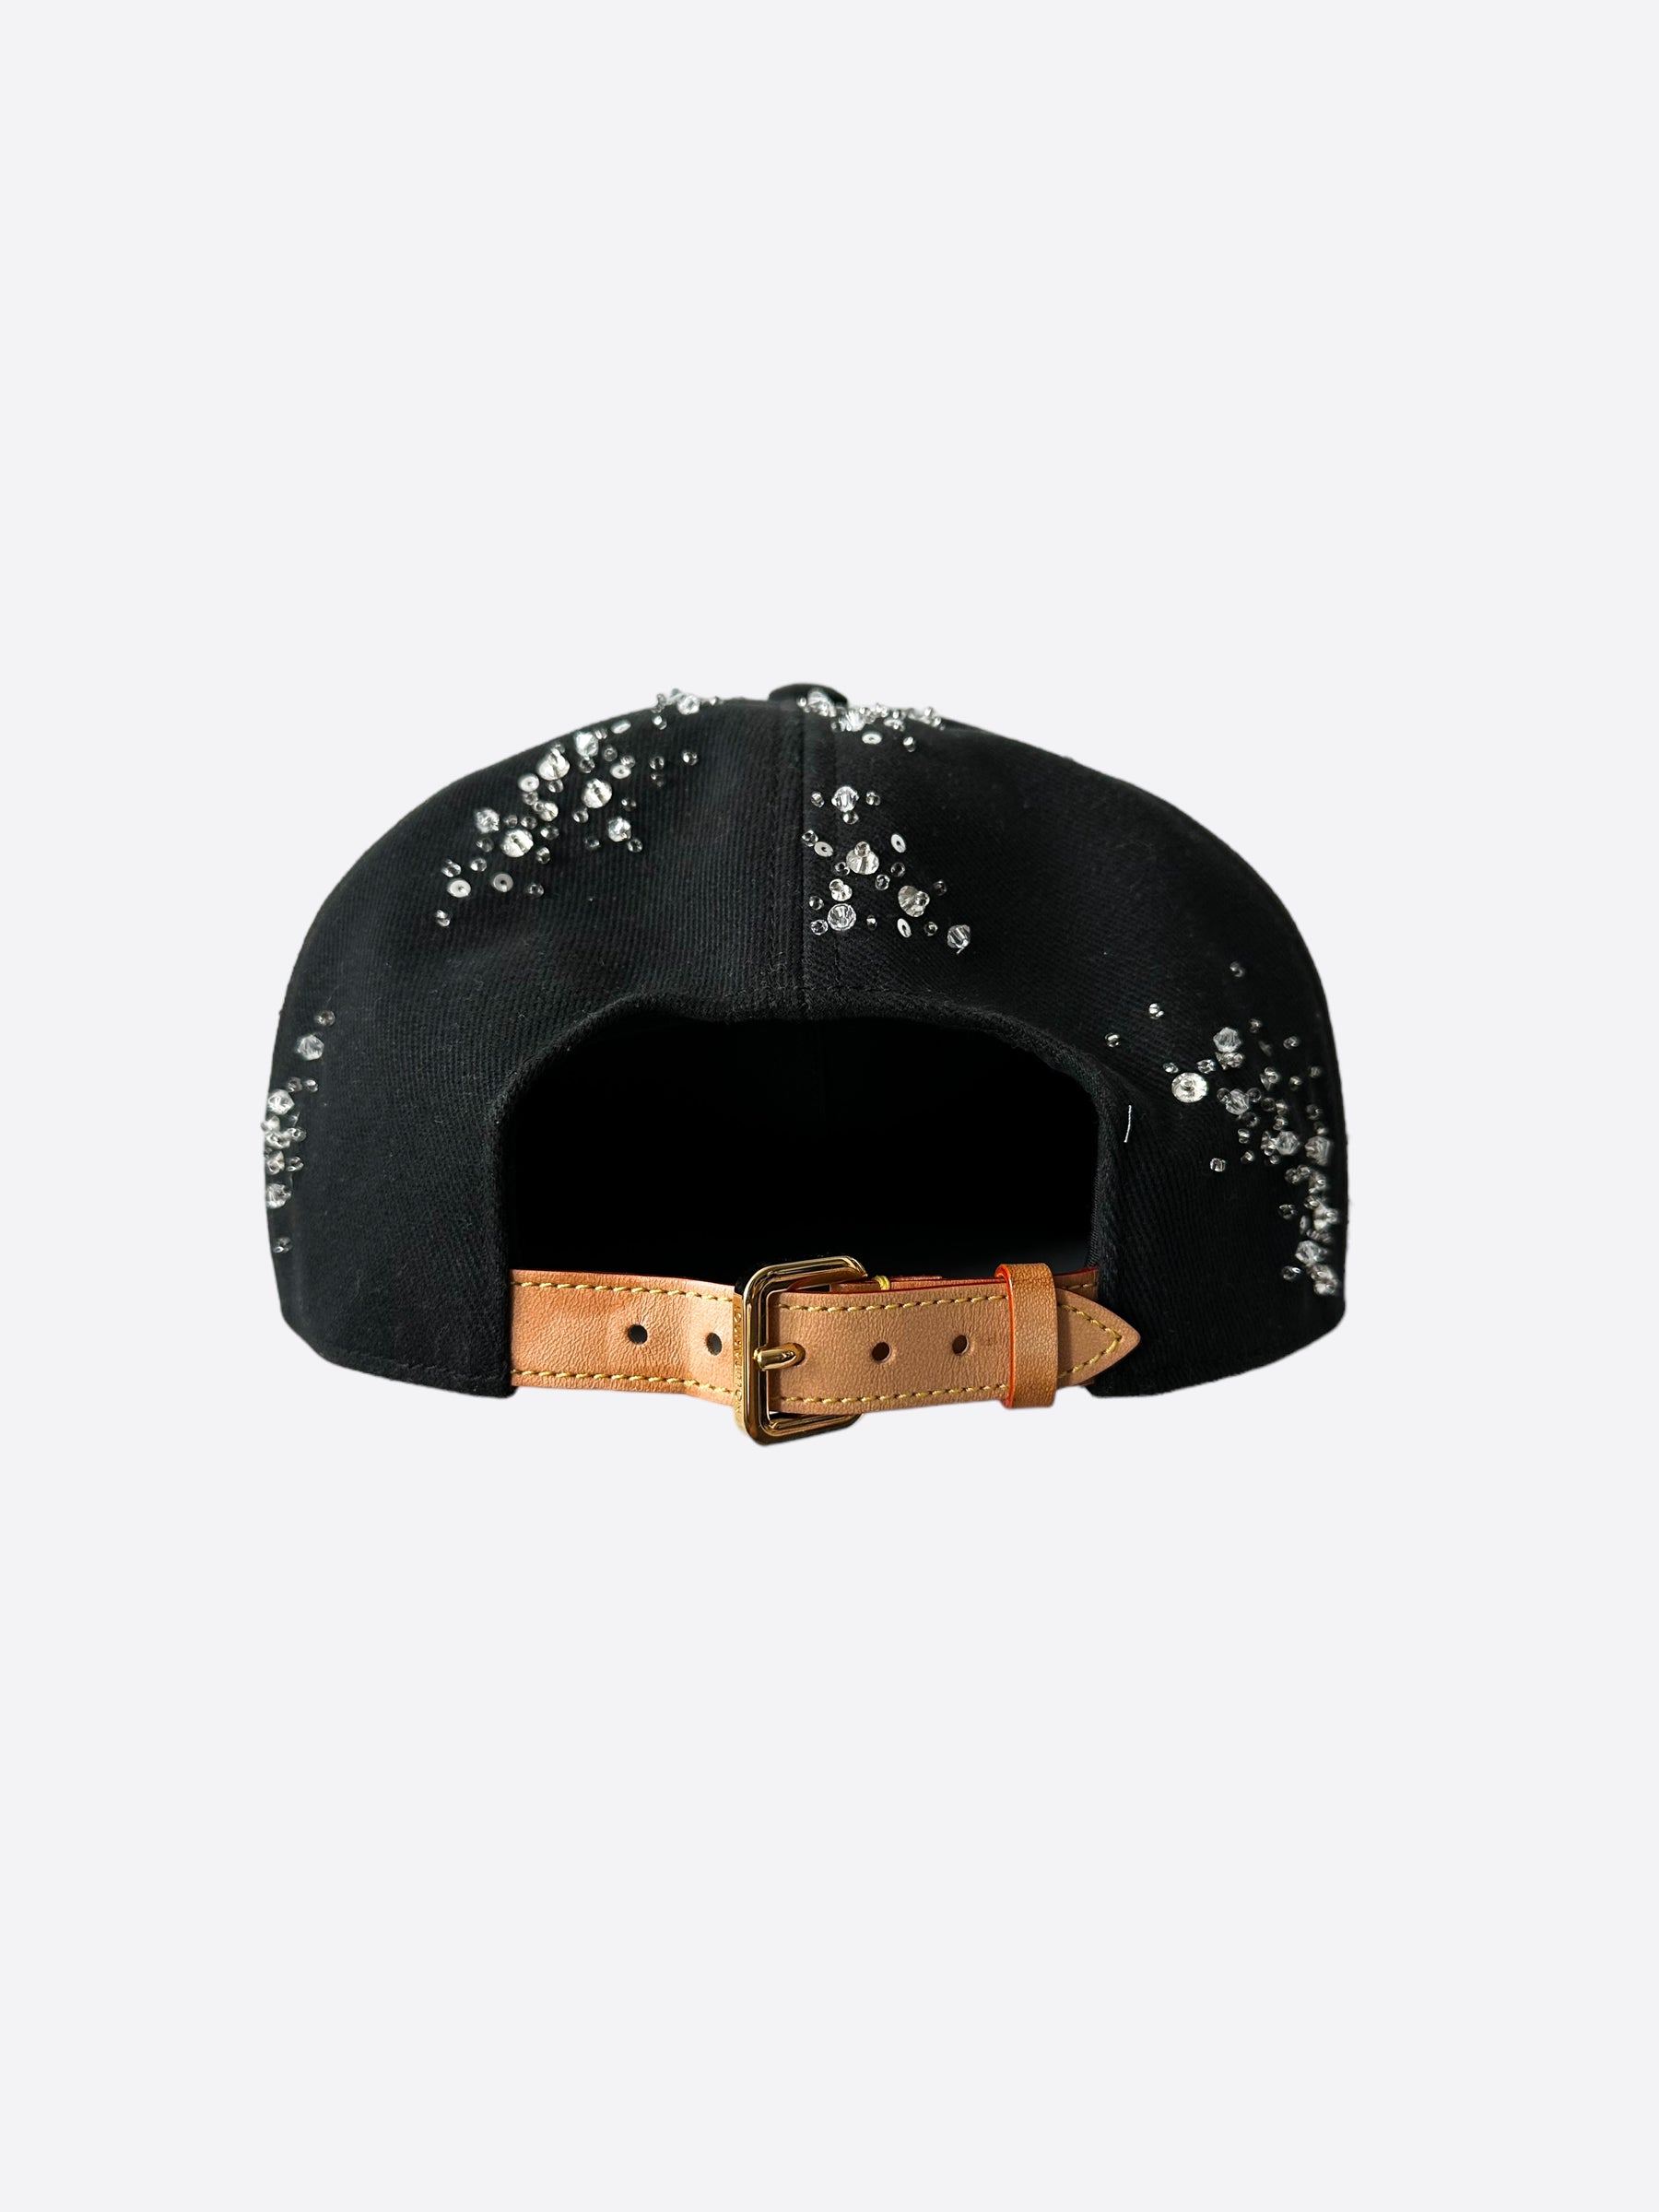 Status.tx - Louis Vuitton Script Crystal Cap Available At Status Only 2 In  the Us